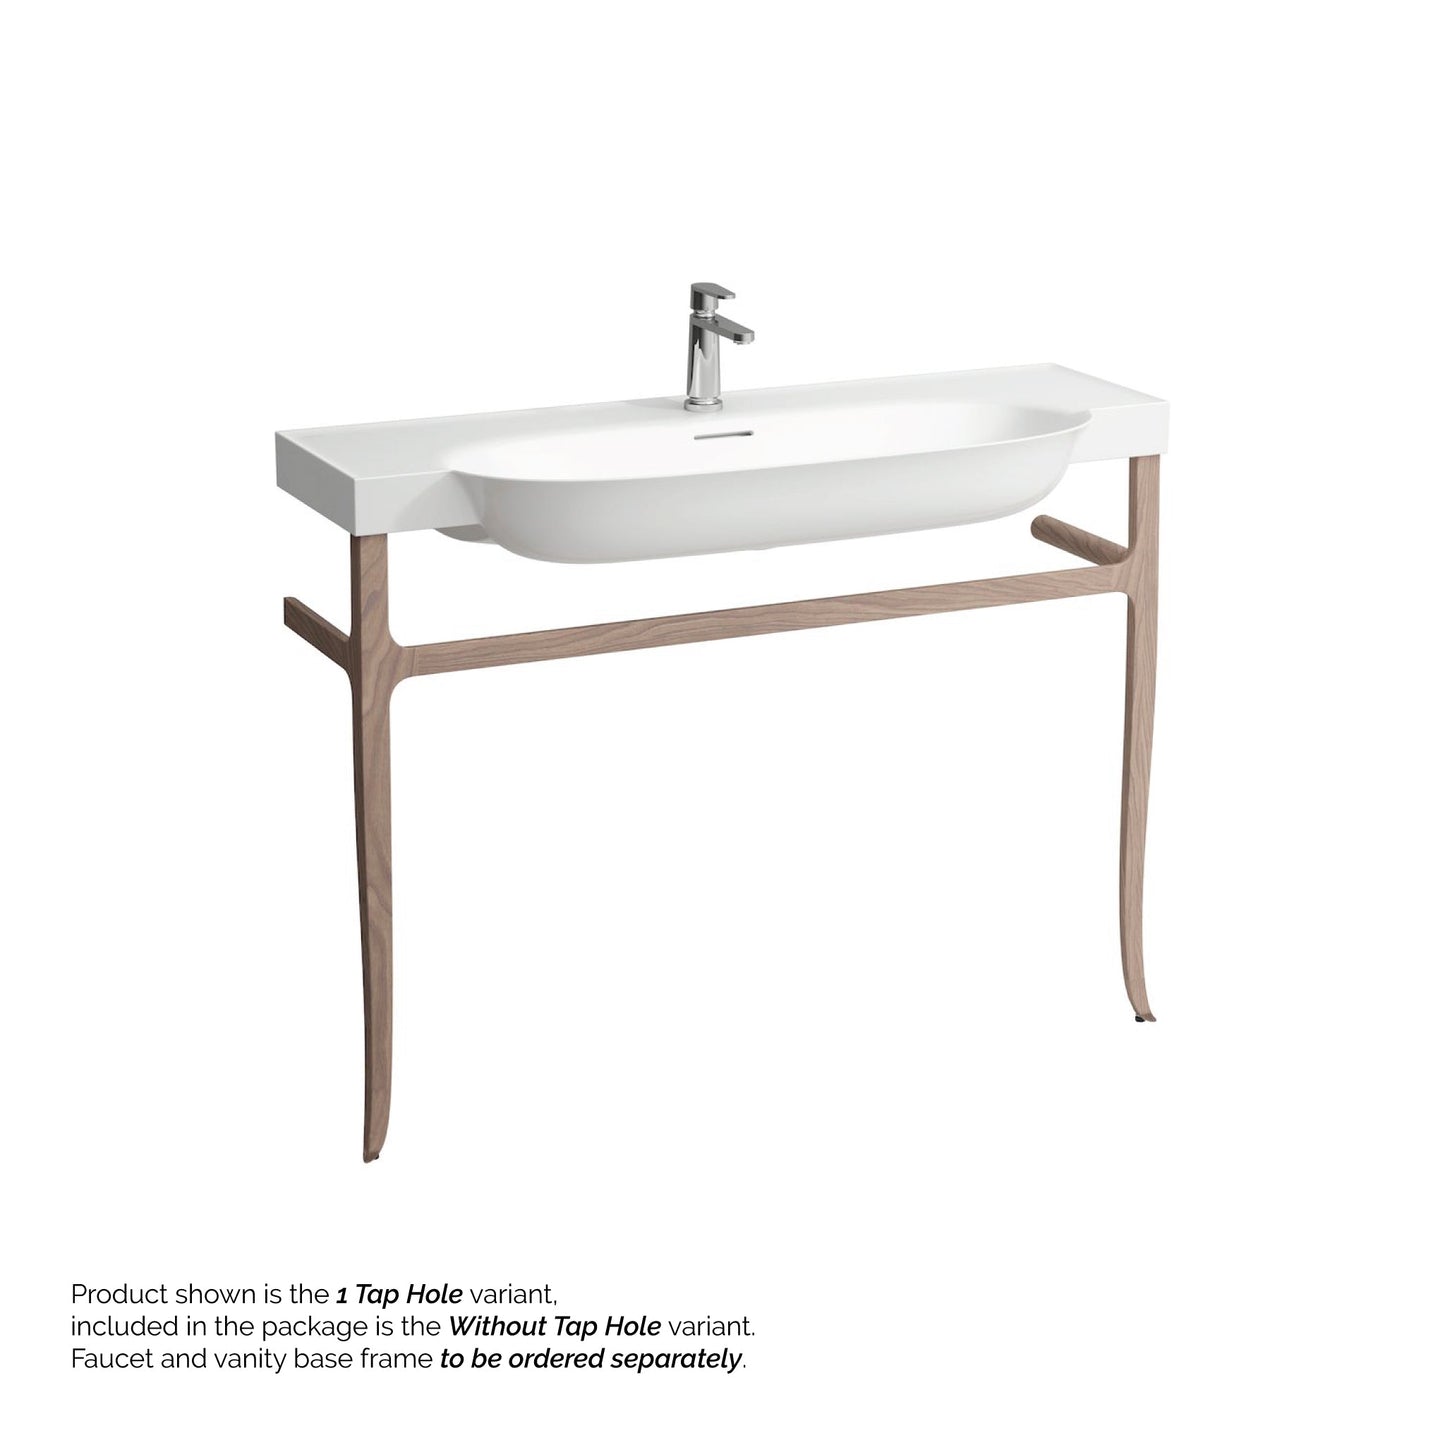 Laufen New Classic 47" x 19" Matte White Ceramic Wall-Mounted Bathroom Sink Without Faucet Hole